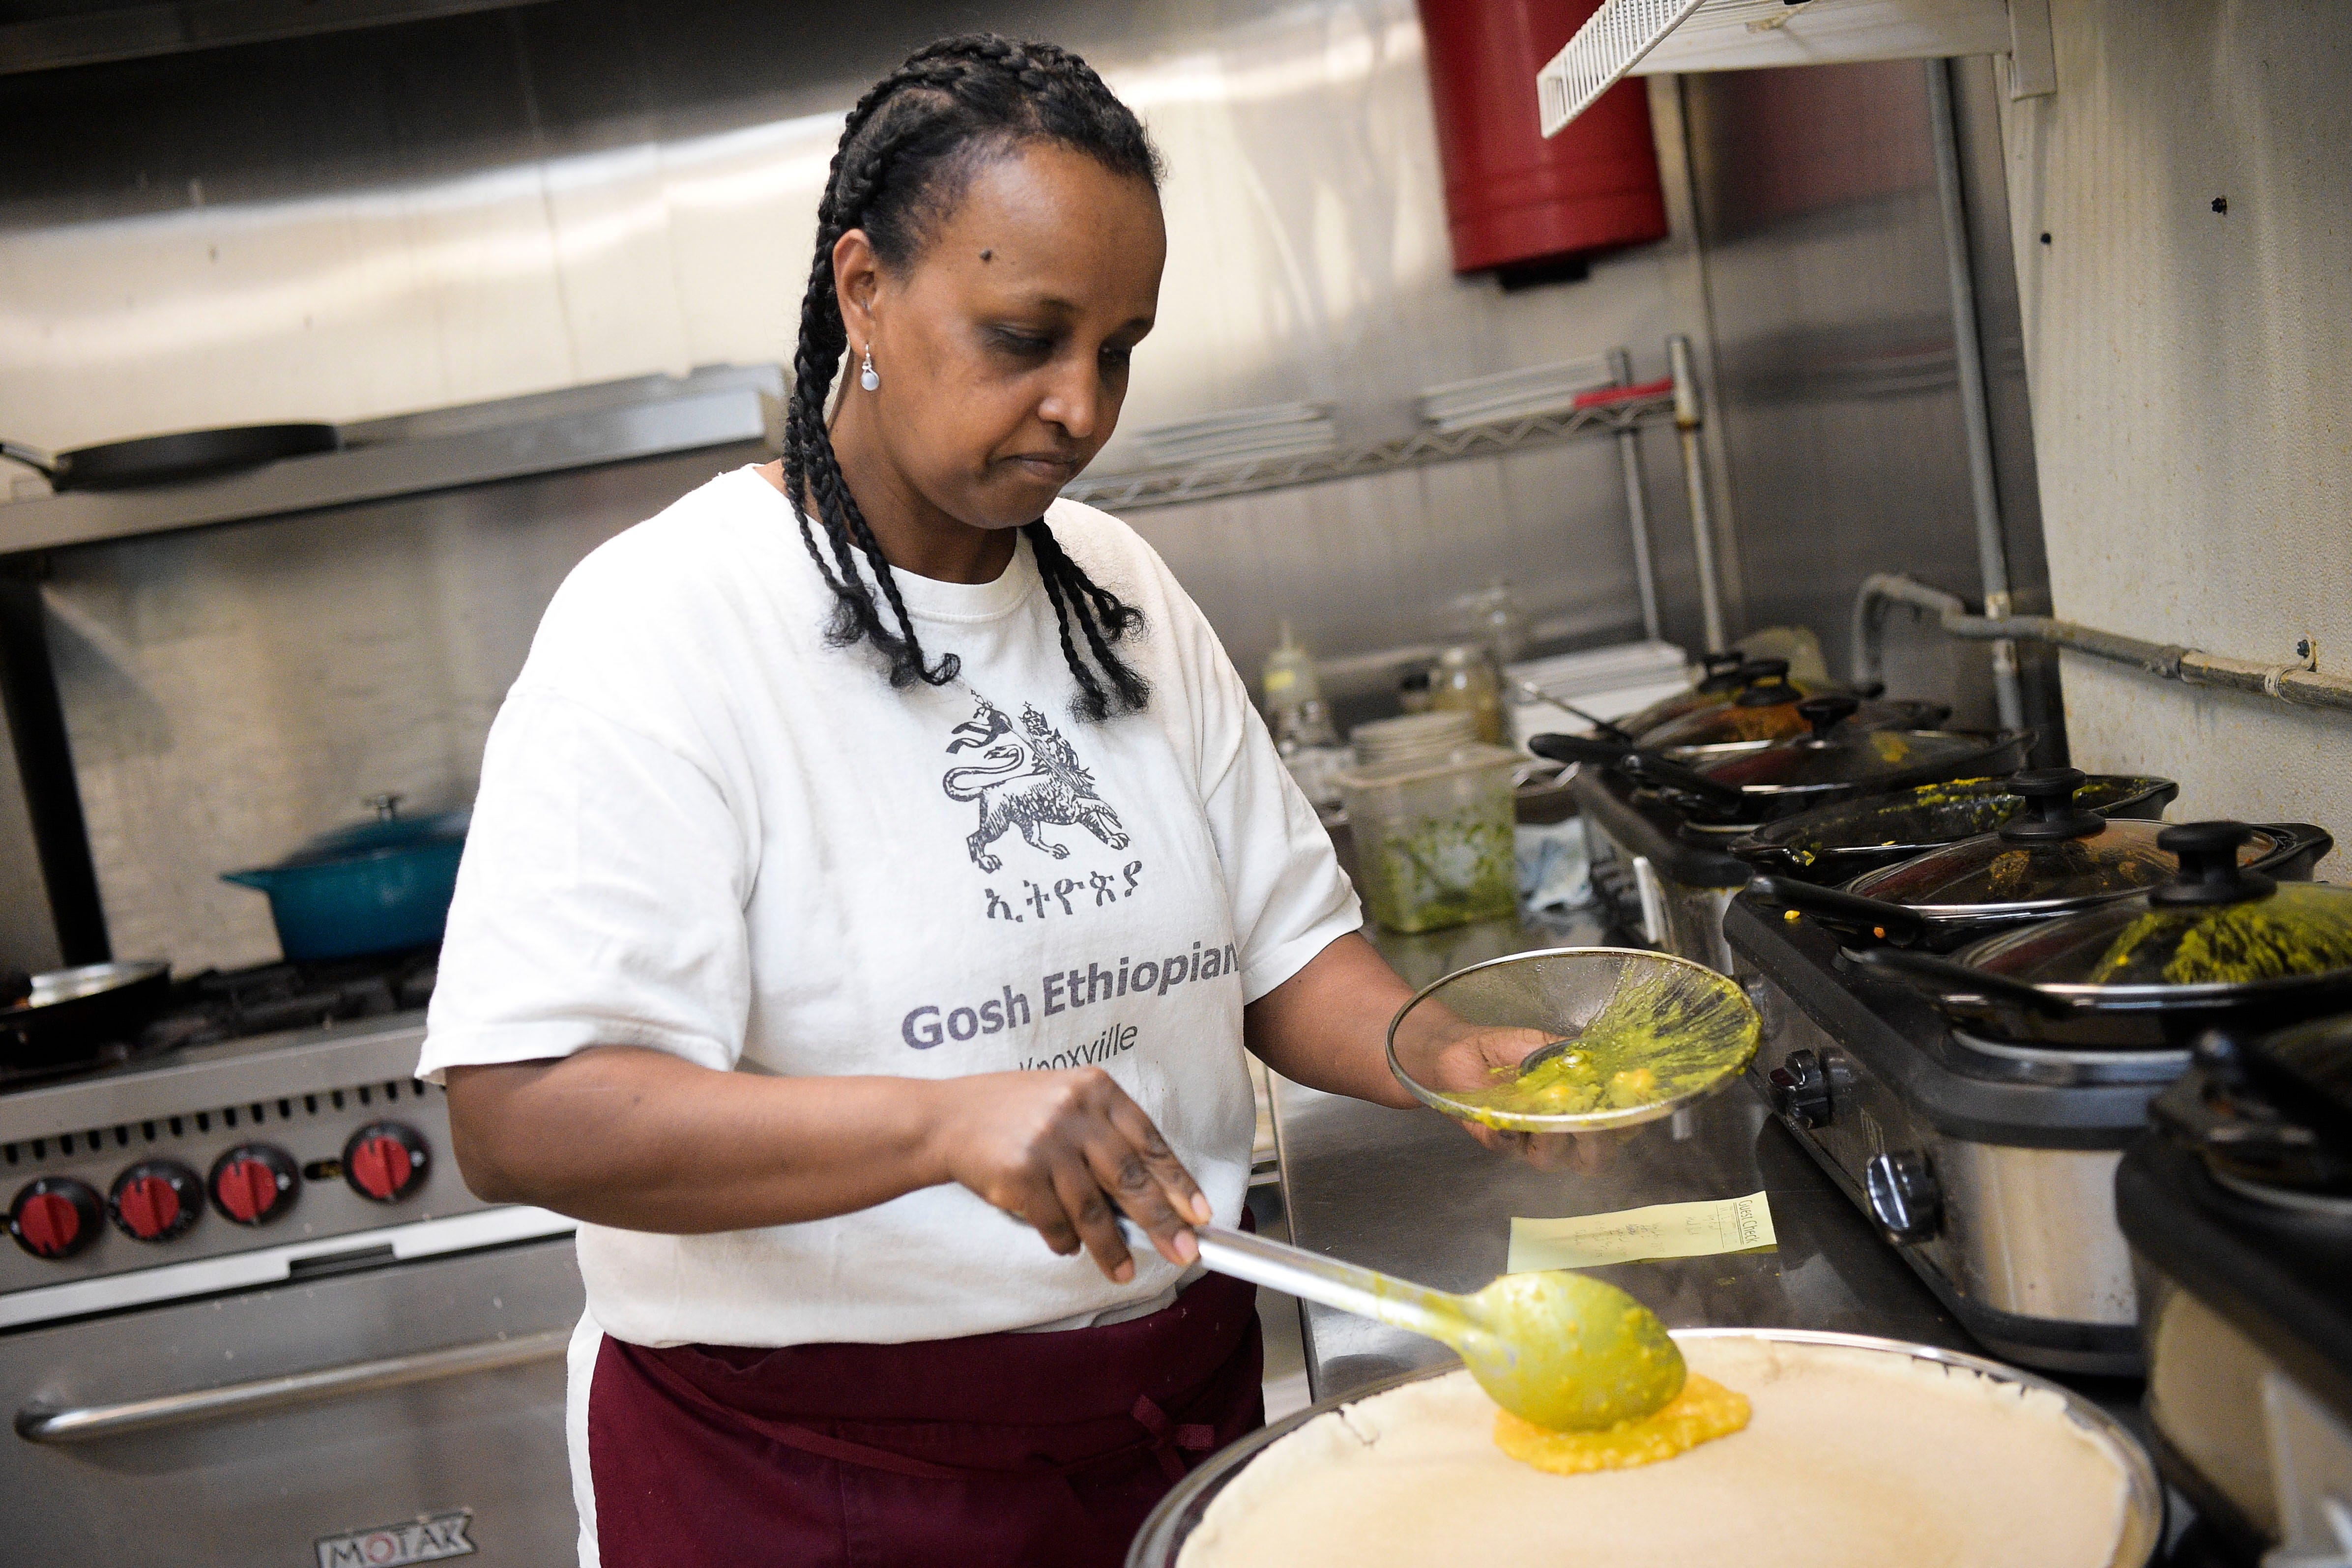 Terri often works alone in the kitchen because finding a good helper has proven difficult. Constrained by time and lack of workers, the
restaurant operates for dinner four nights a week, putting a squeeze on the restaurant's finances. "I work to pay rent," Terri said. "I don't want to give up this place."